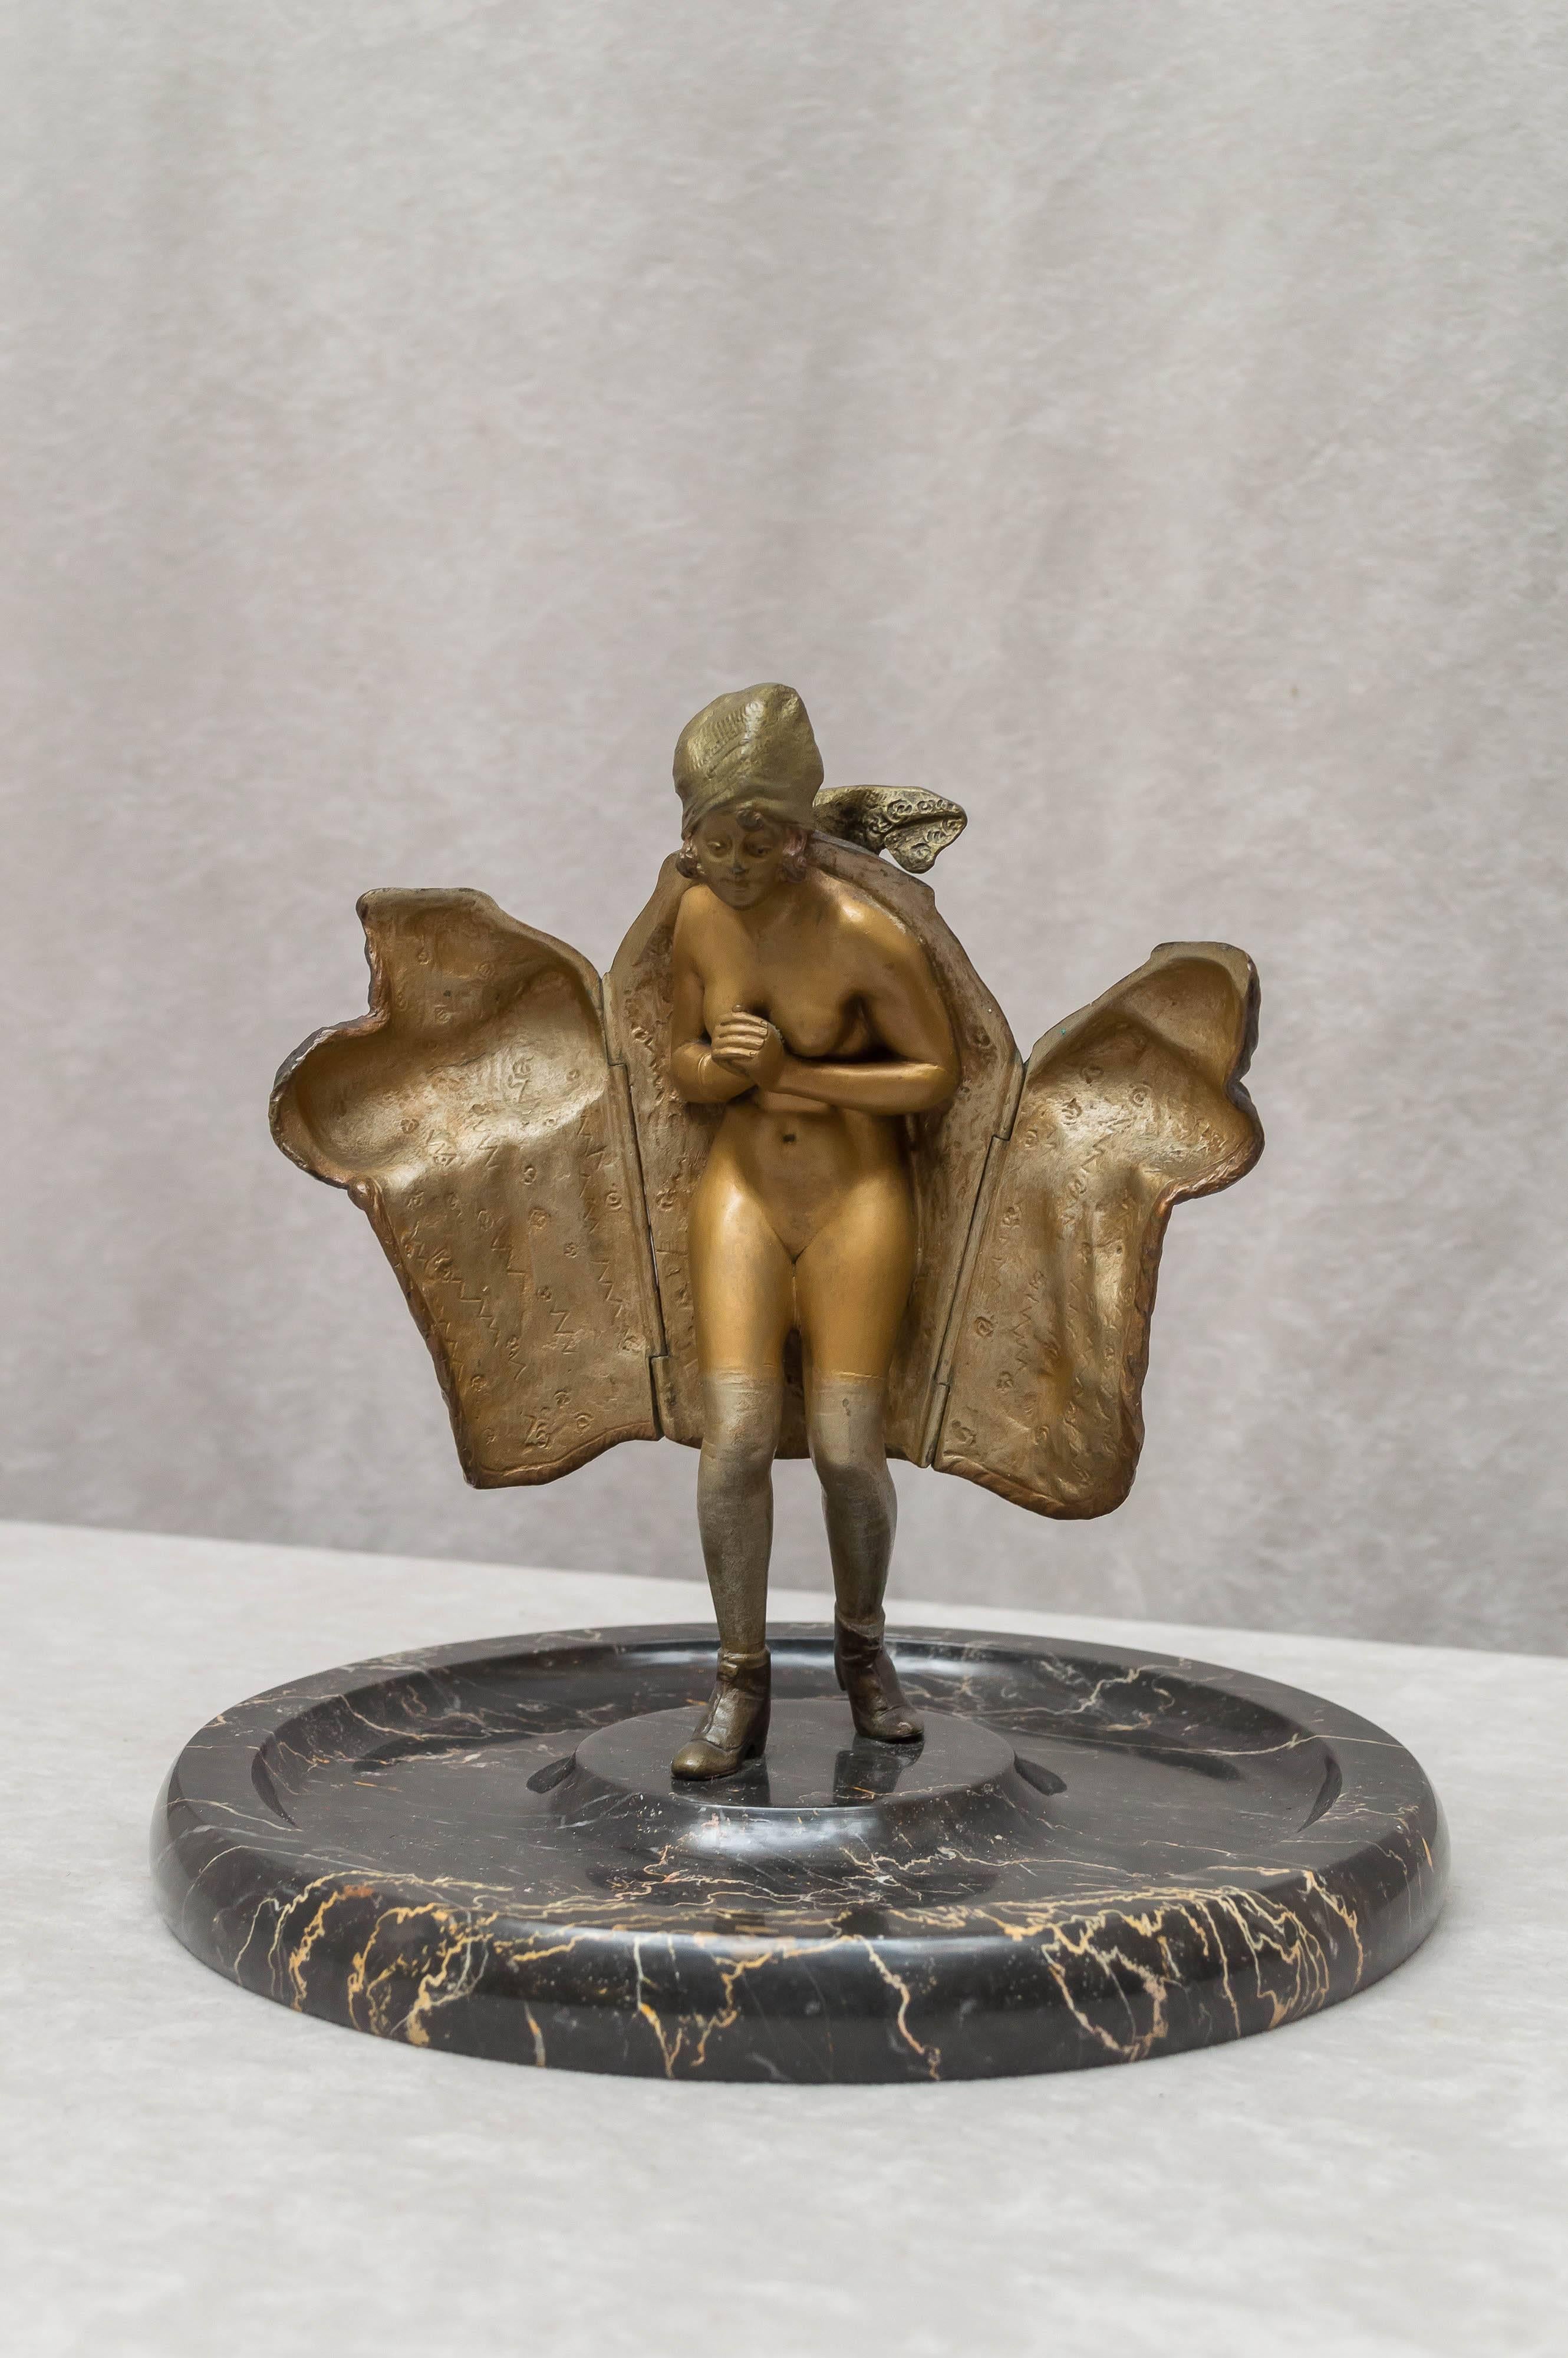 This has always been one of our favorite naughty bronzes. This lovely gal, wearing her finest fur coat, is willing to open it up to reveal her nude body. This bronze is in remarkable condition. Normally there is lots of wear to the nude, as well as